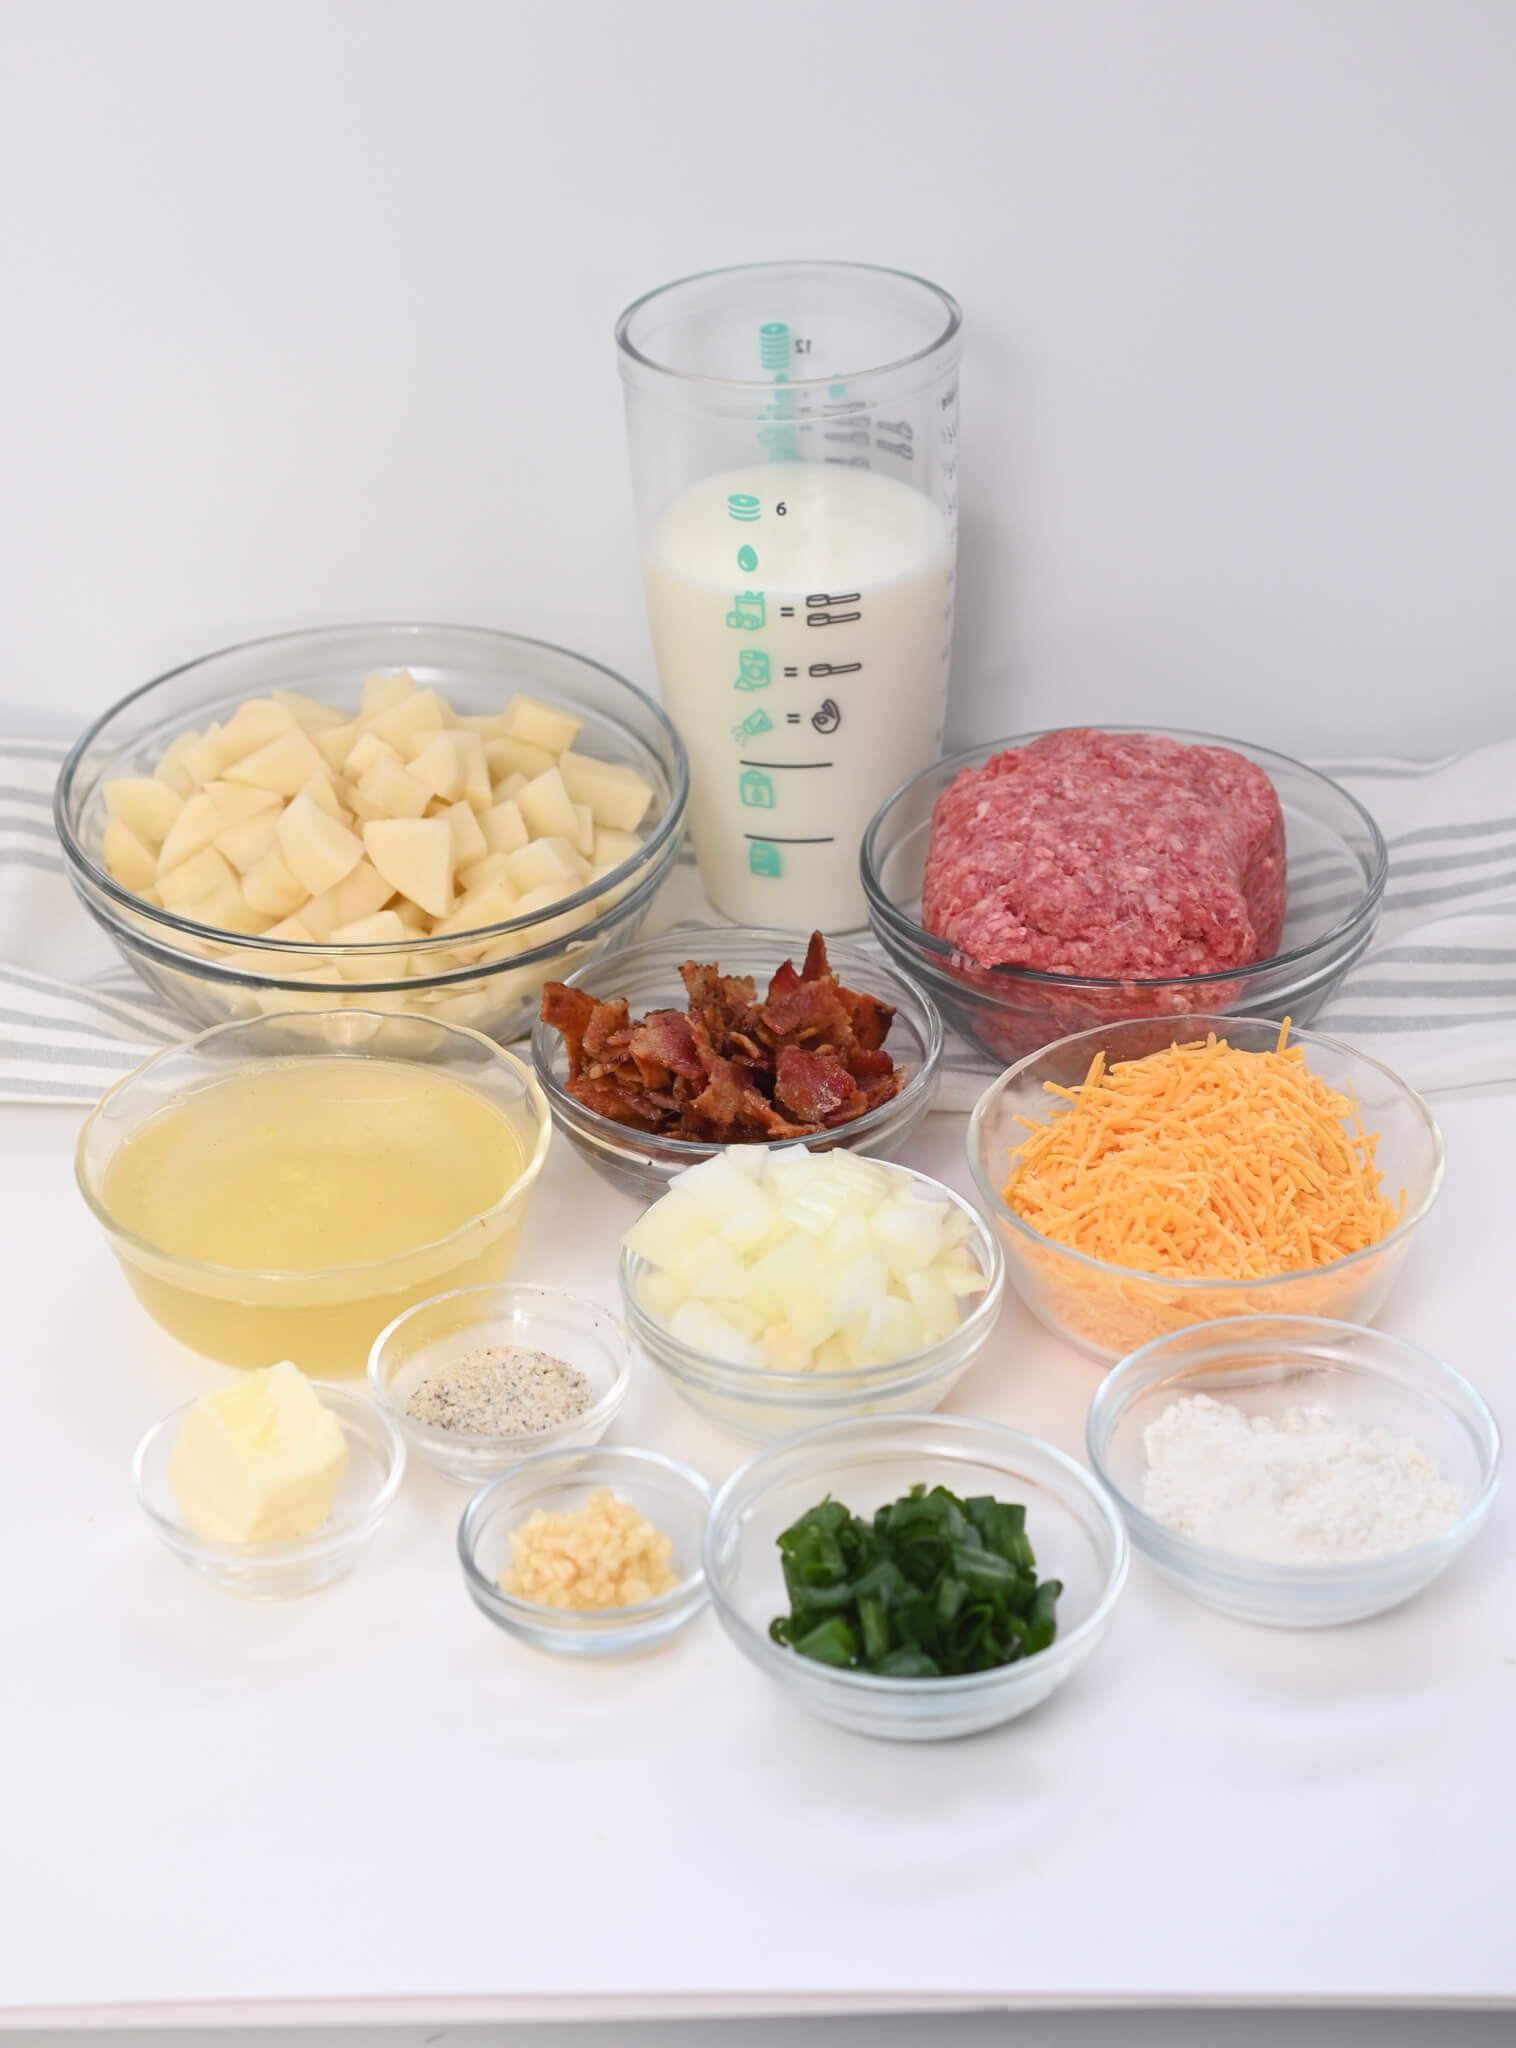 The ingredients for a hamburger, vegetables and cheese.